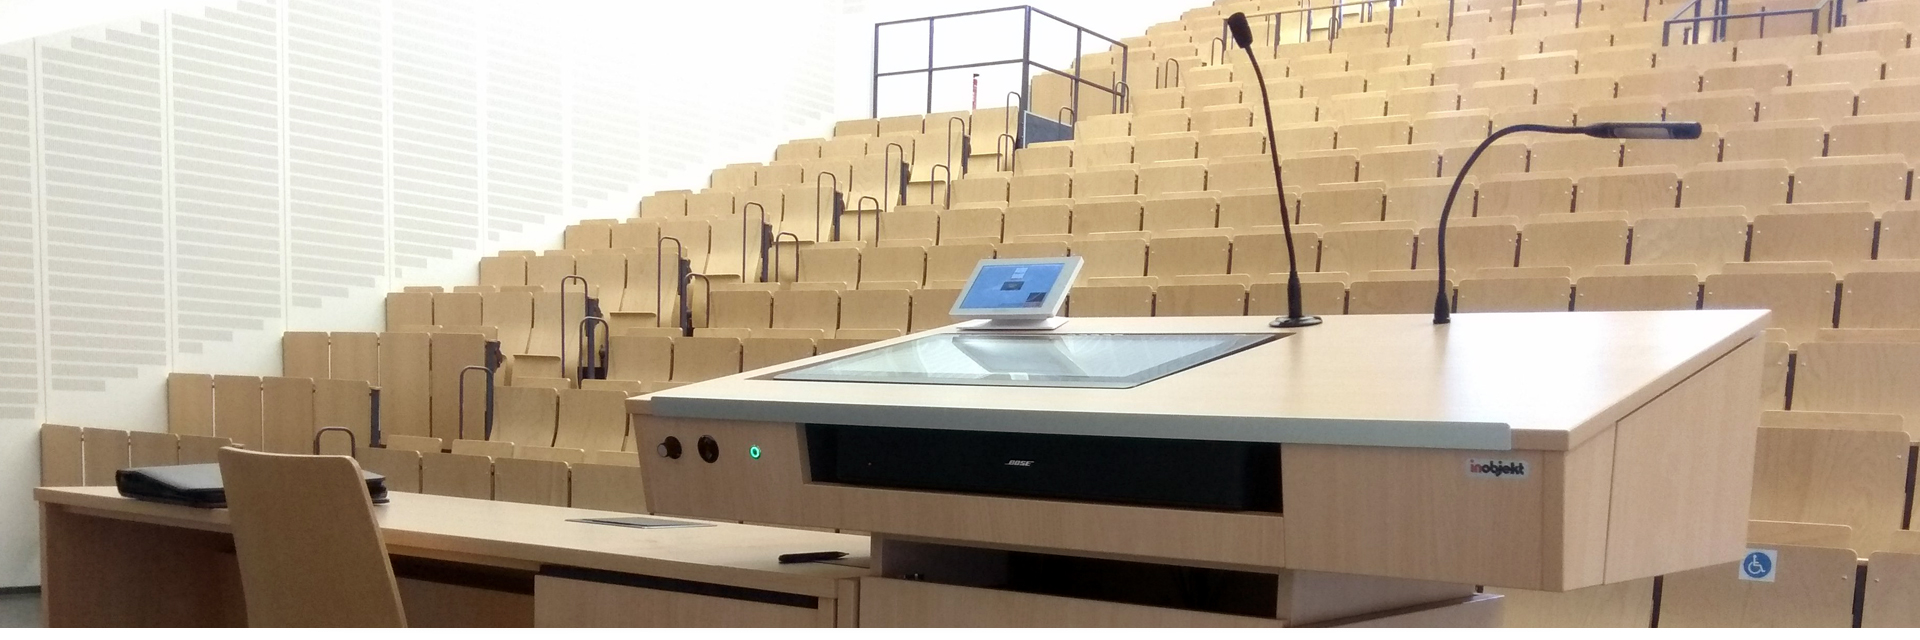 Header: Lecturer's desk teach.magna with connected lecturer's workstation in a university lecture hall. The desk contains an interactive display, media control, microphone, desk light and sound bar.